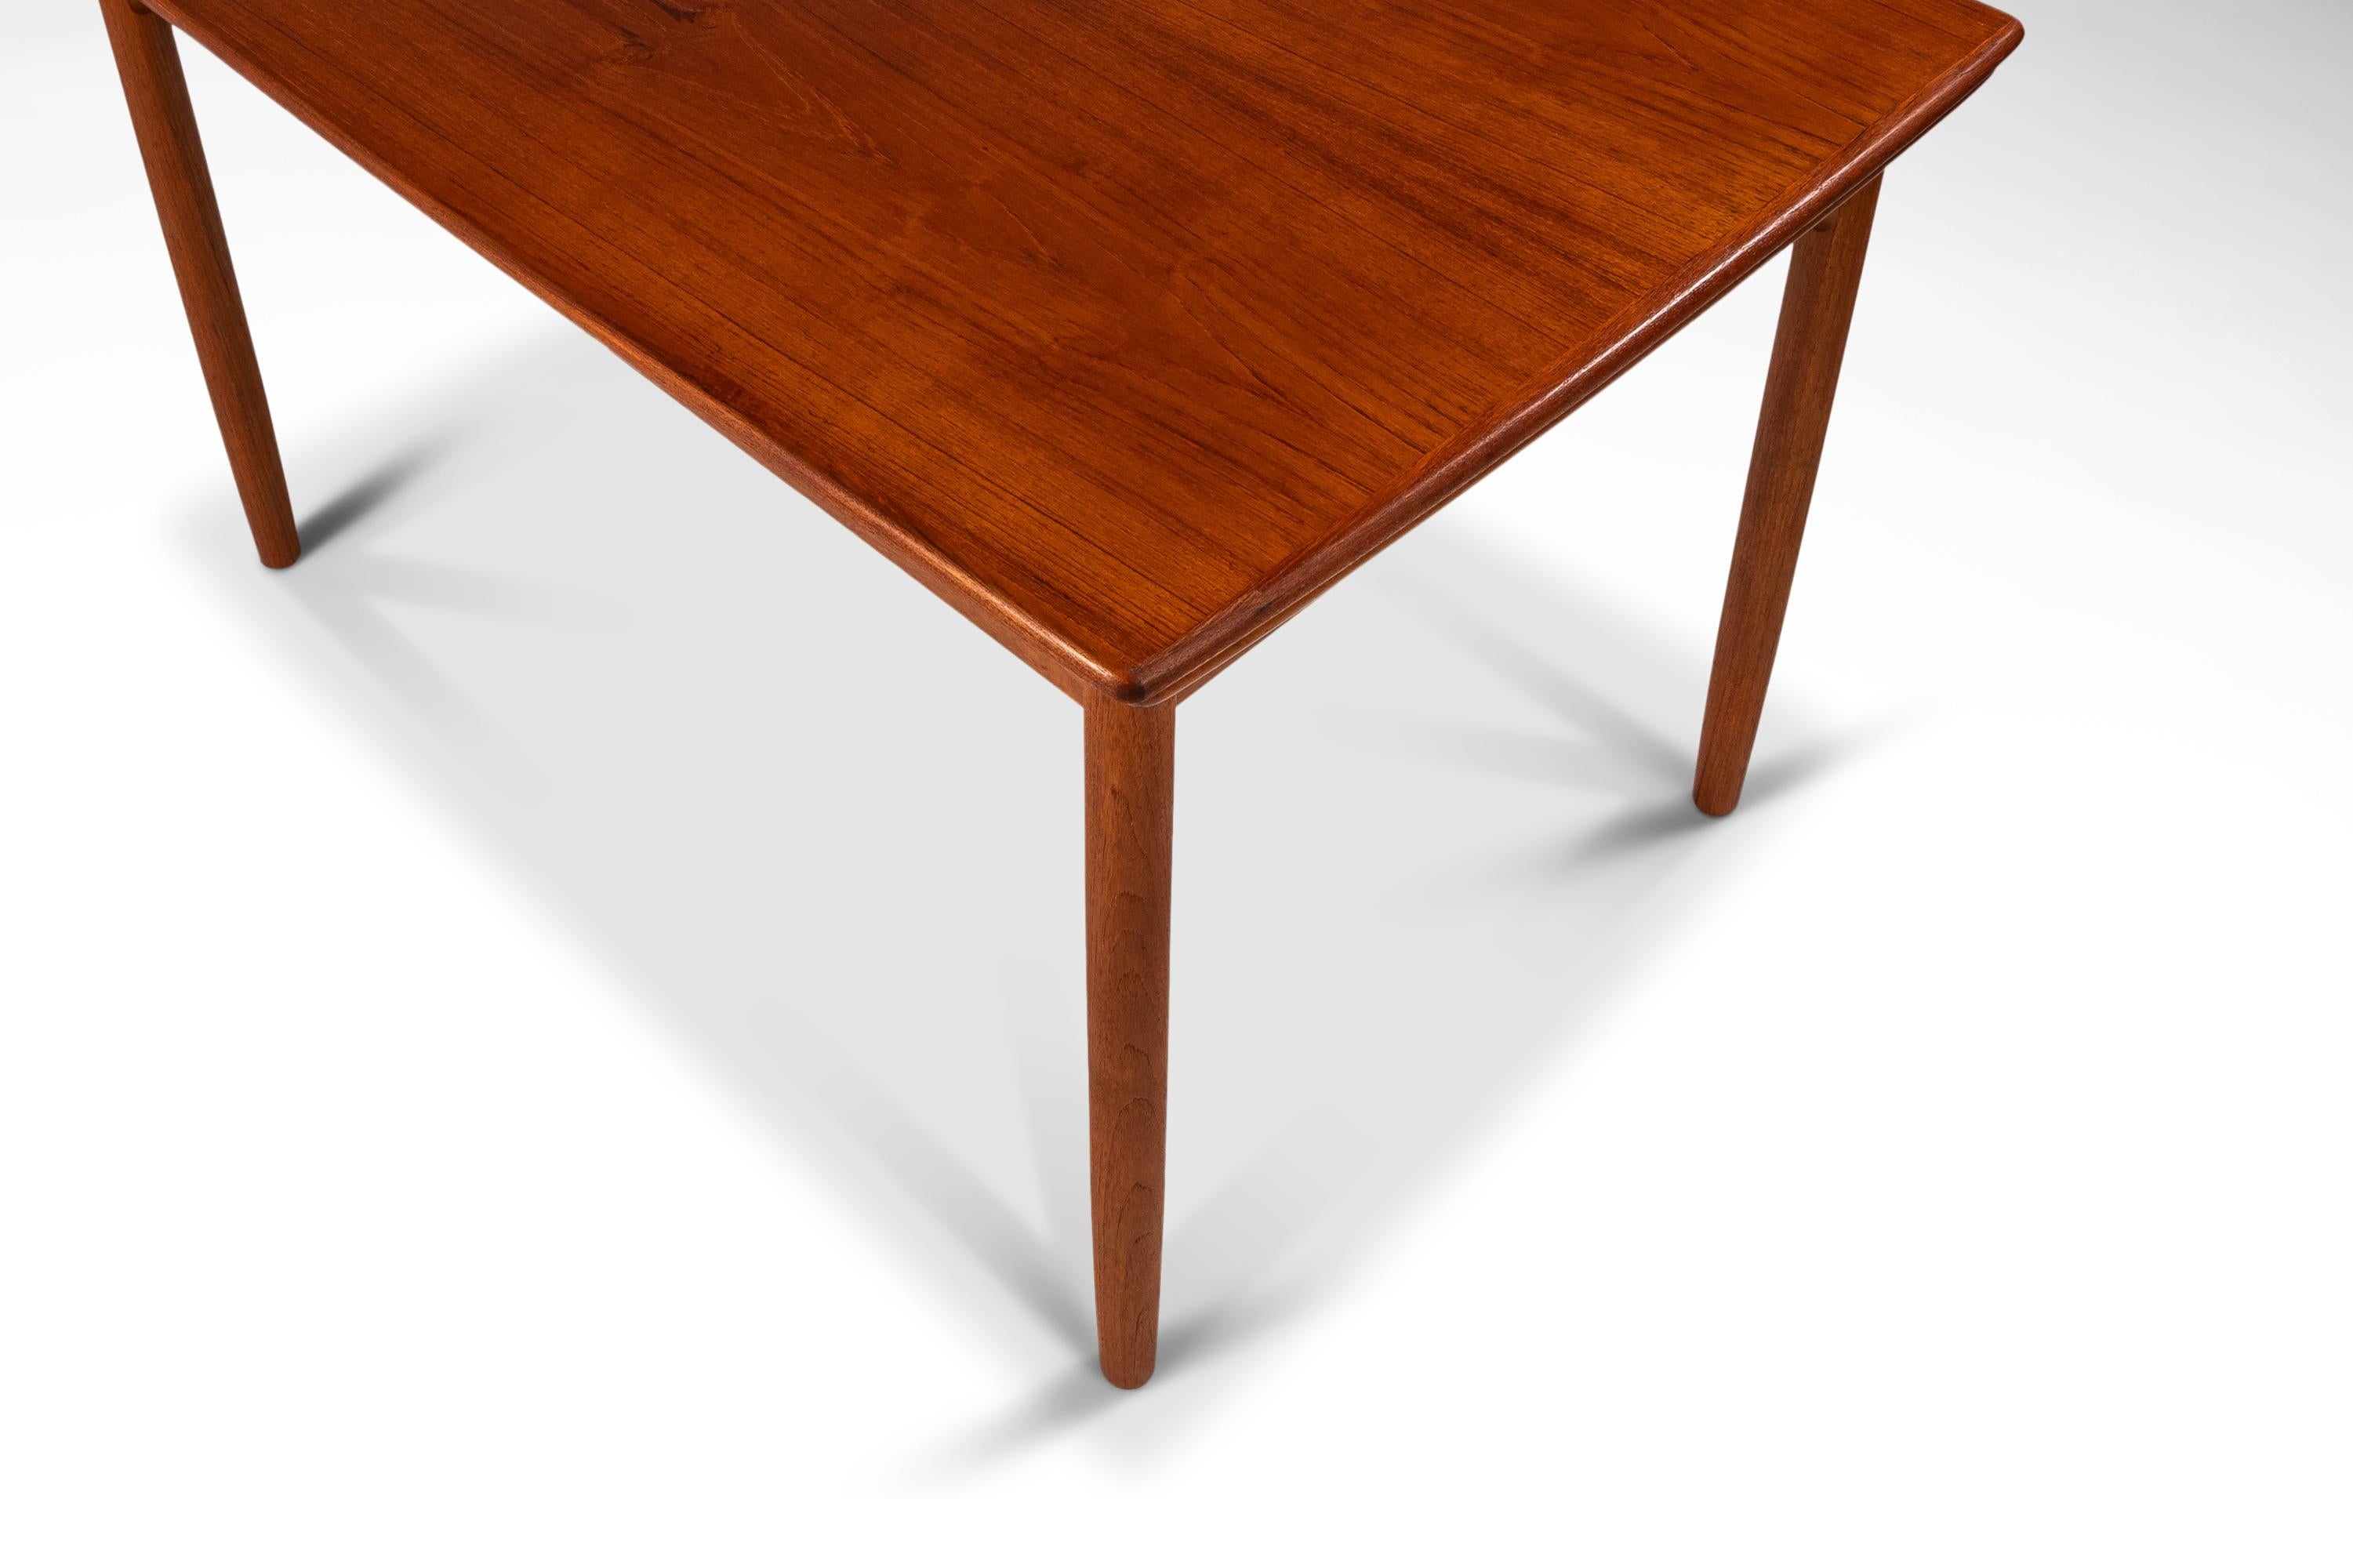 Danish Modern Expansion Dining Table in Teak w/ Stow-In-Table Leaves, c. 1960s For Sale 8